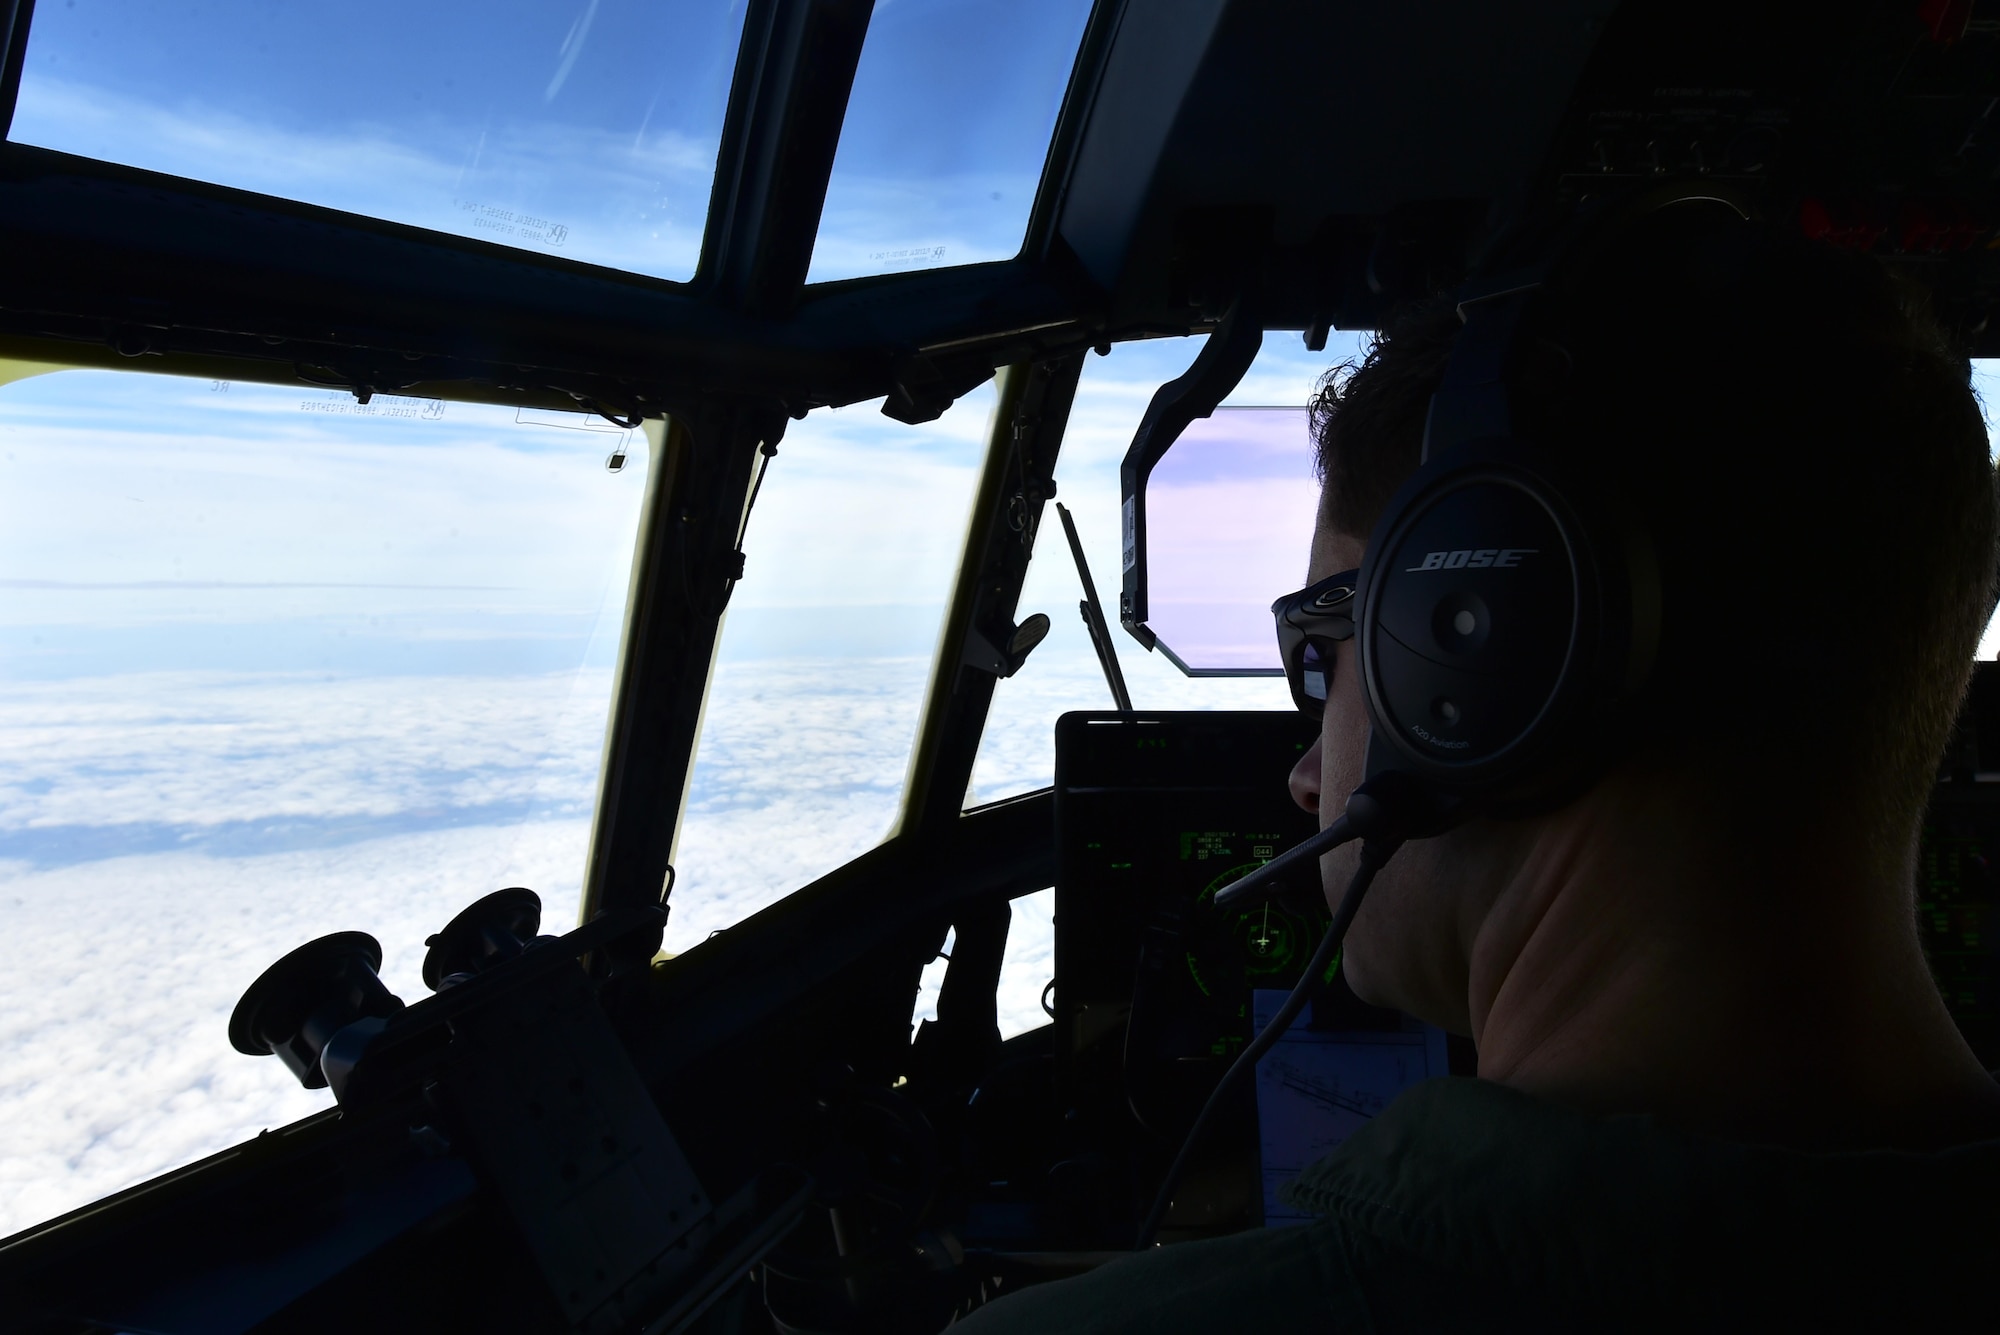 U.S. Air Force Capt.Christopher Freed, 37th Airlift Squadron pilot, stares out the cockpit of a C-130J Super Hercules while flying from Ramstein Air Base, Germany, to Powidz AB, Poland, Oct. 13, 2017. Airmen assigned to the 86th Airlift Wing flew to Poland for the latest iteration of Operation Atlantic Resolve, a NATO-led training operation between the U.S. Air Force and Polish Air Force. (U.S. Air Force photo by Staff Sgt. Jonathan Bass)